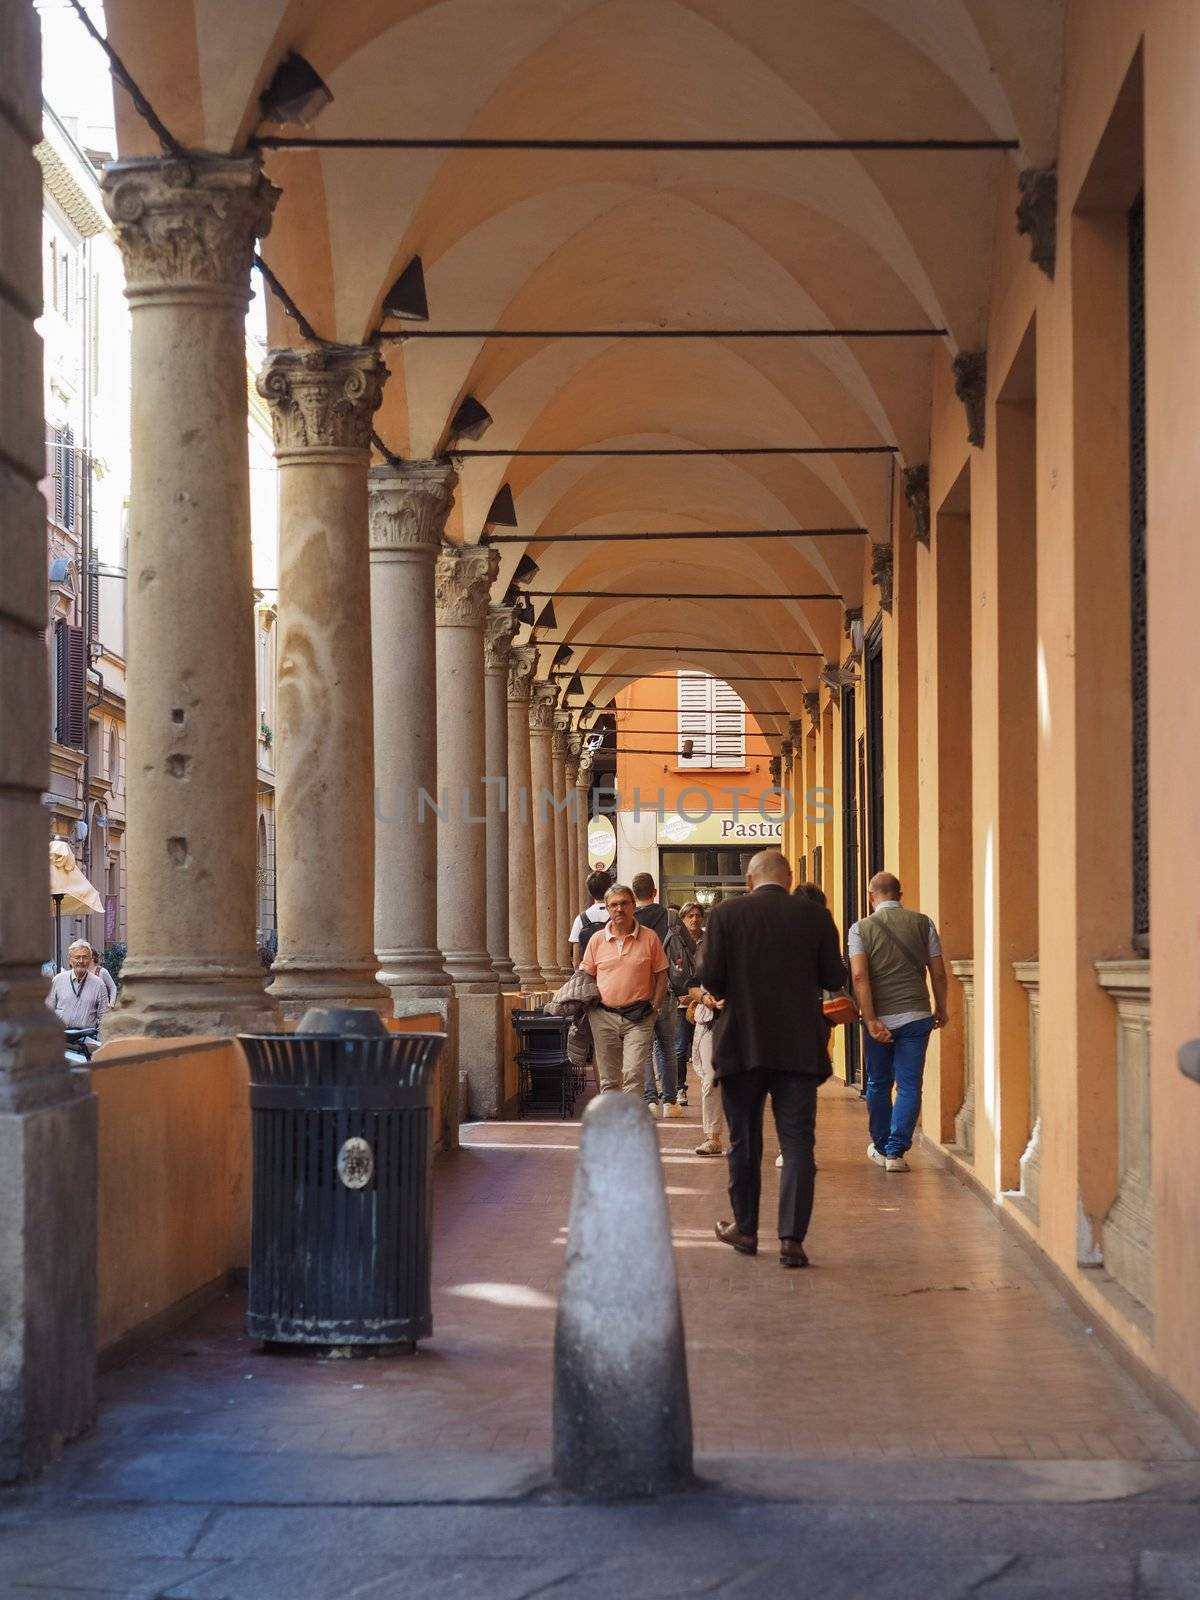 BOLOGNA, ITALY - CIRCA SEPTEMBER 2018: People in the city centre